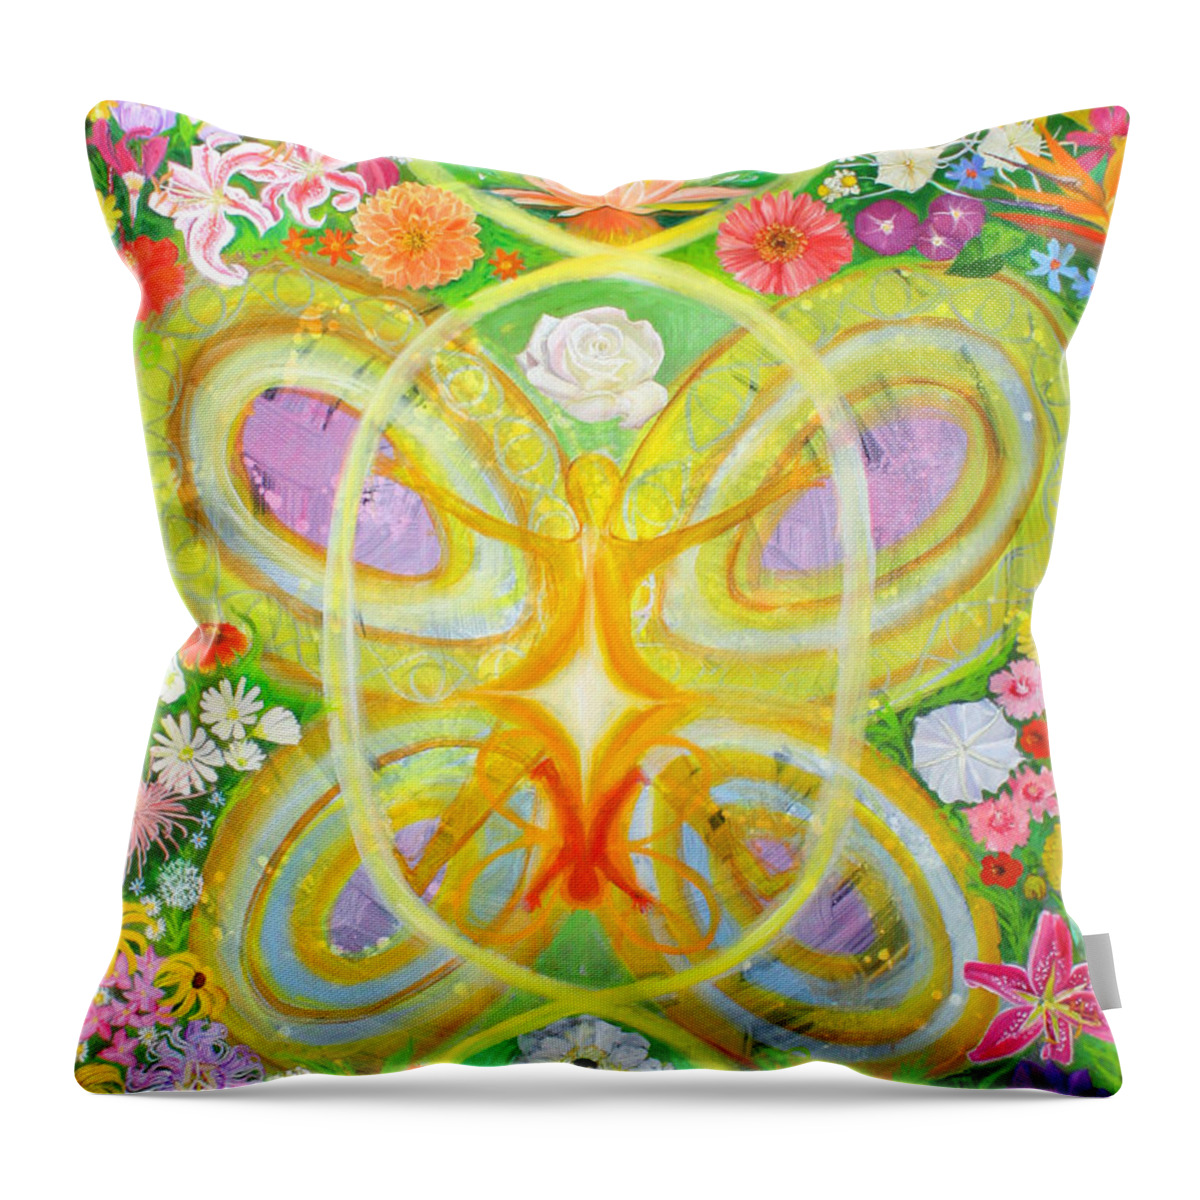 Flowers Throw Pillow featuring the painting Birth by Anne Cameron Cutri